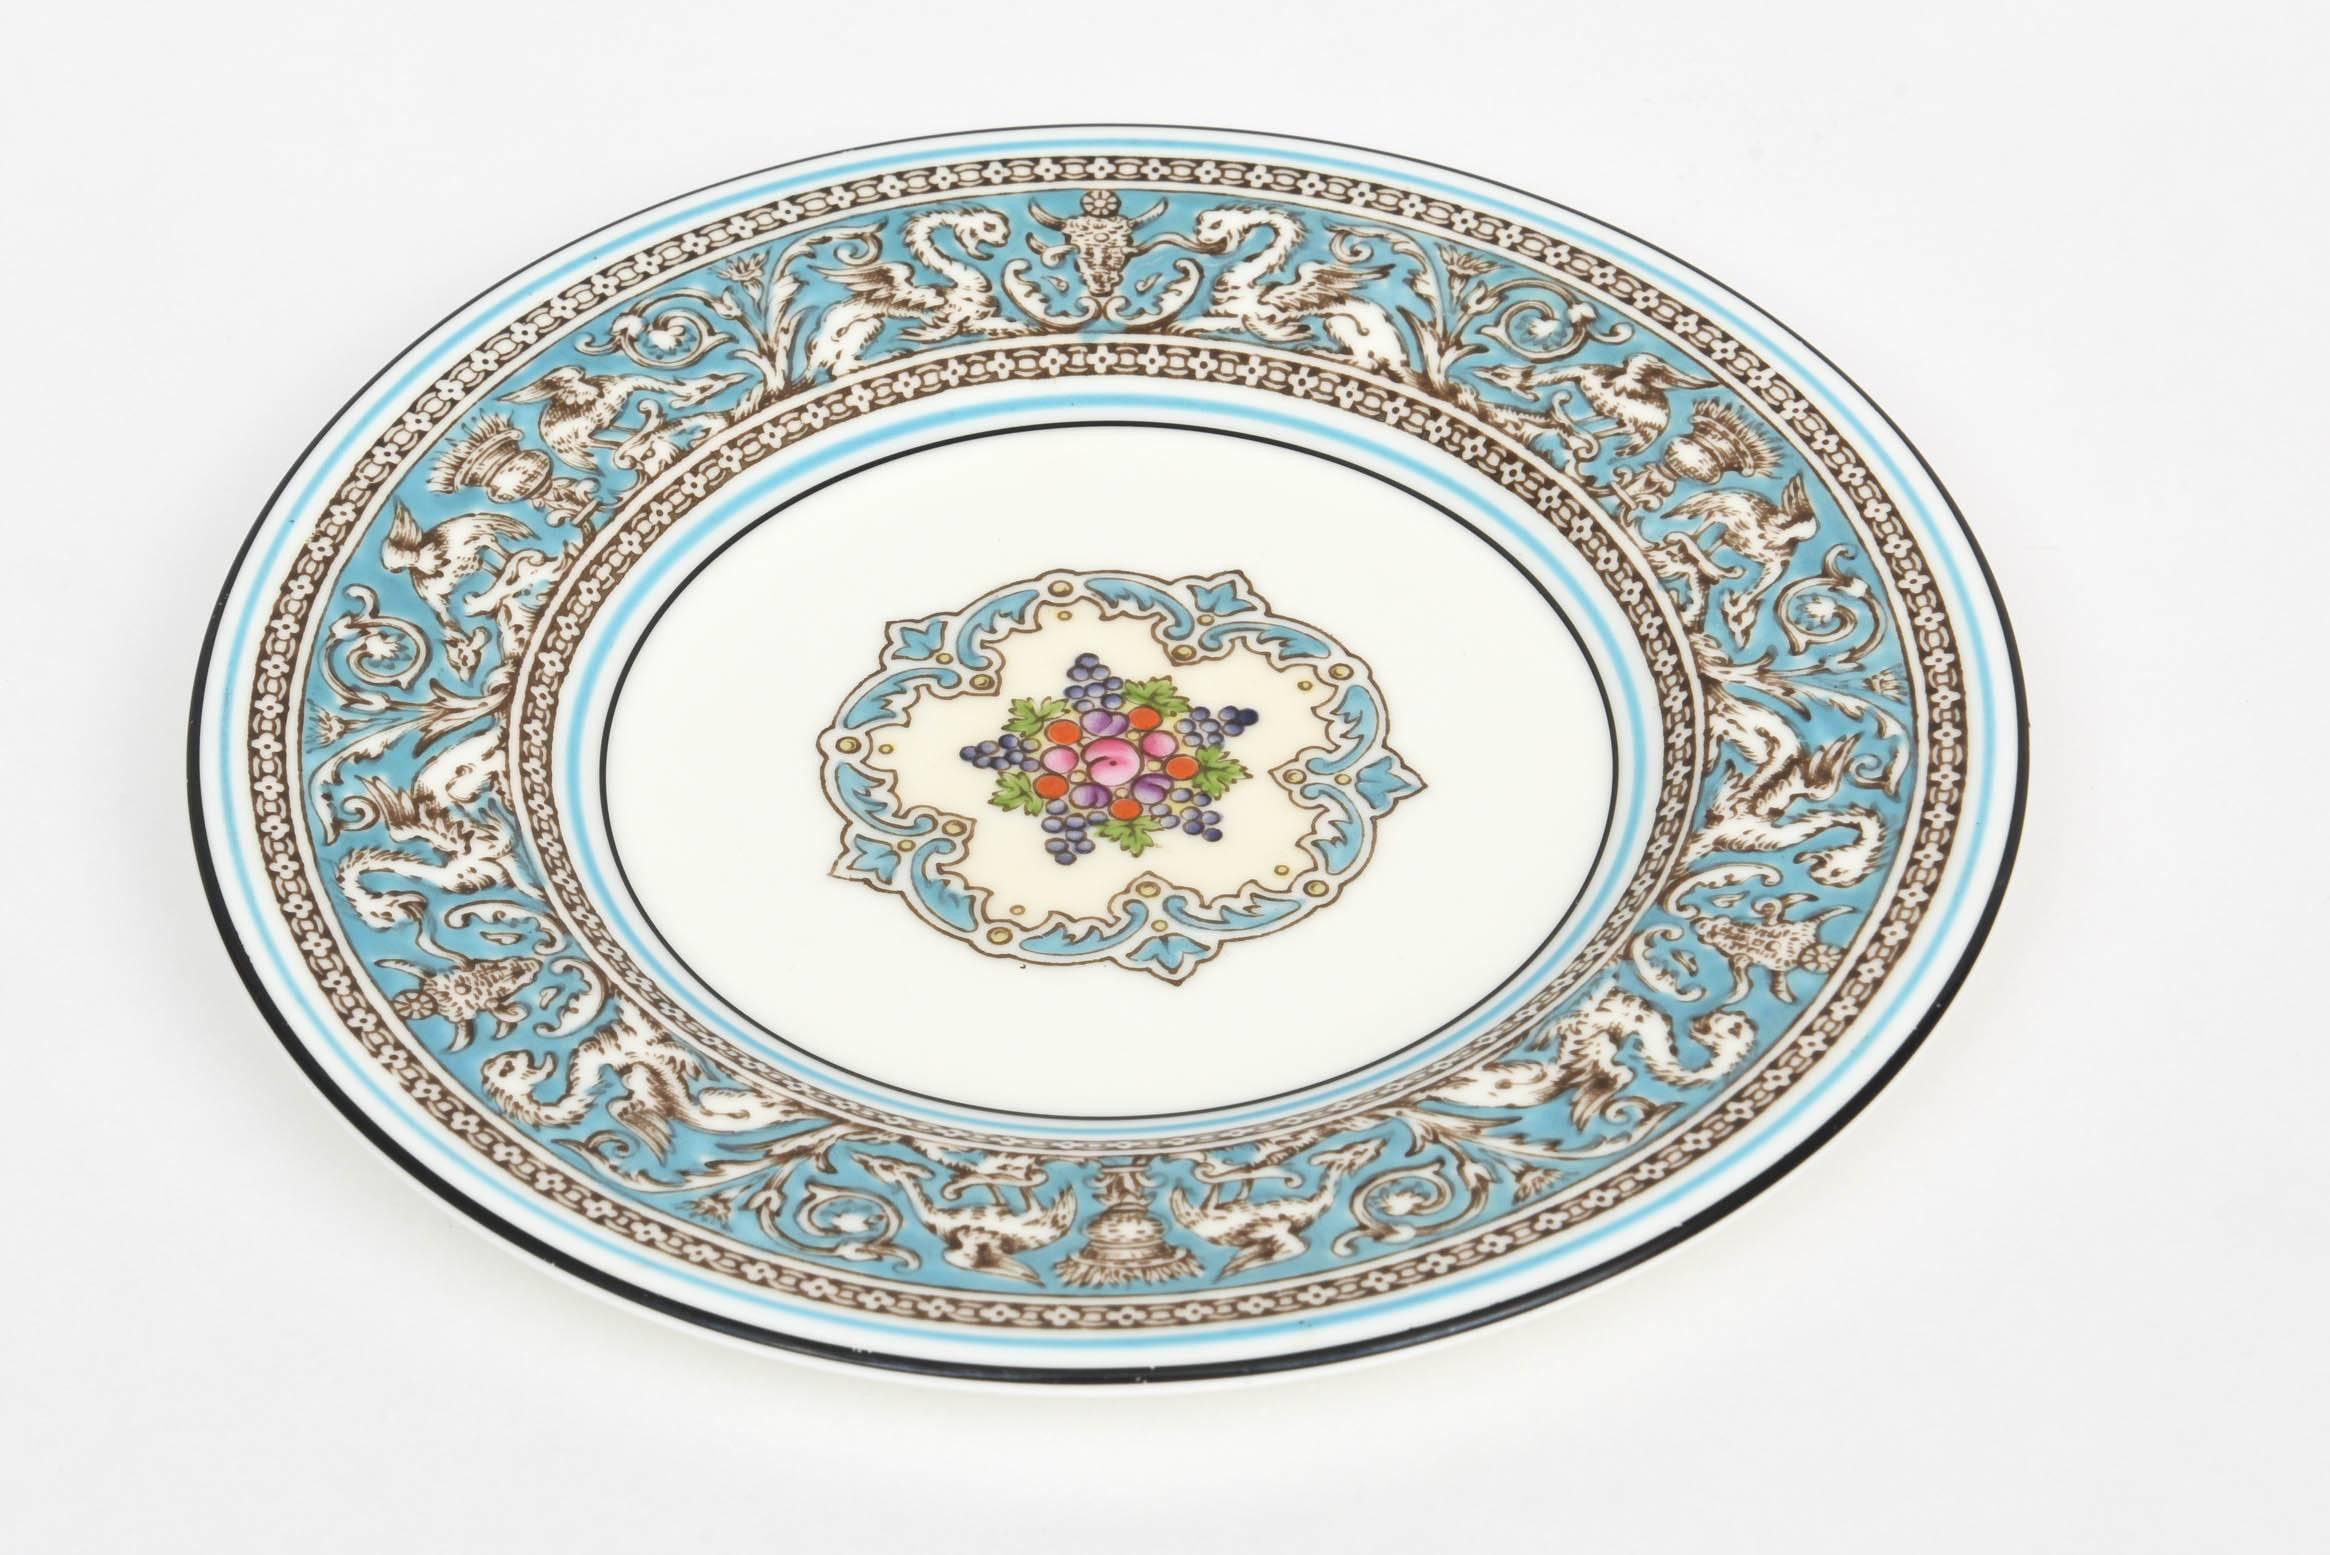 Wedgwood Turquoise China Dinner Service for 12, 92 Pieces Total, Florentine 1